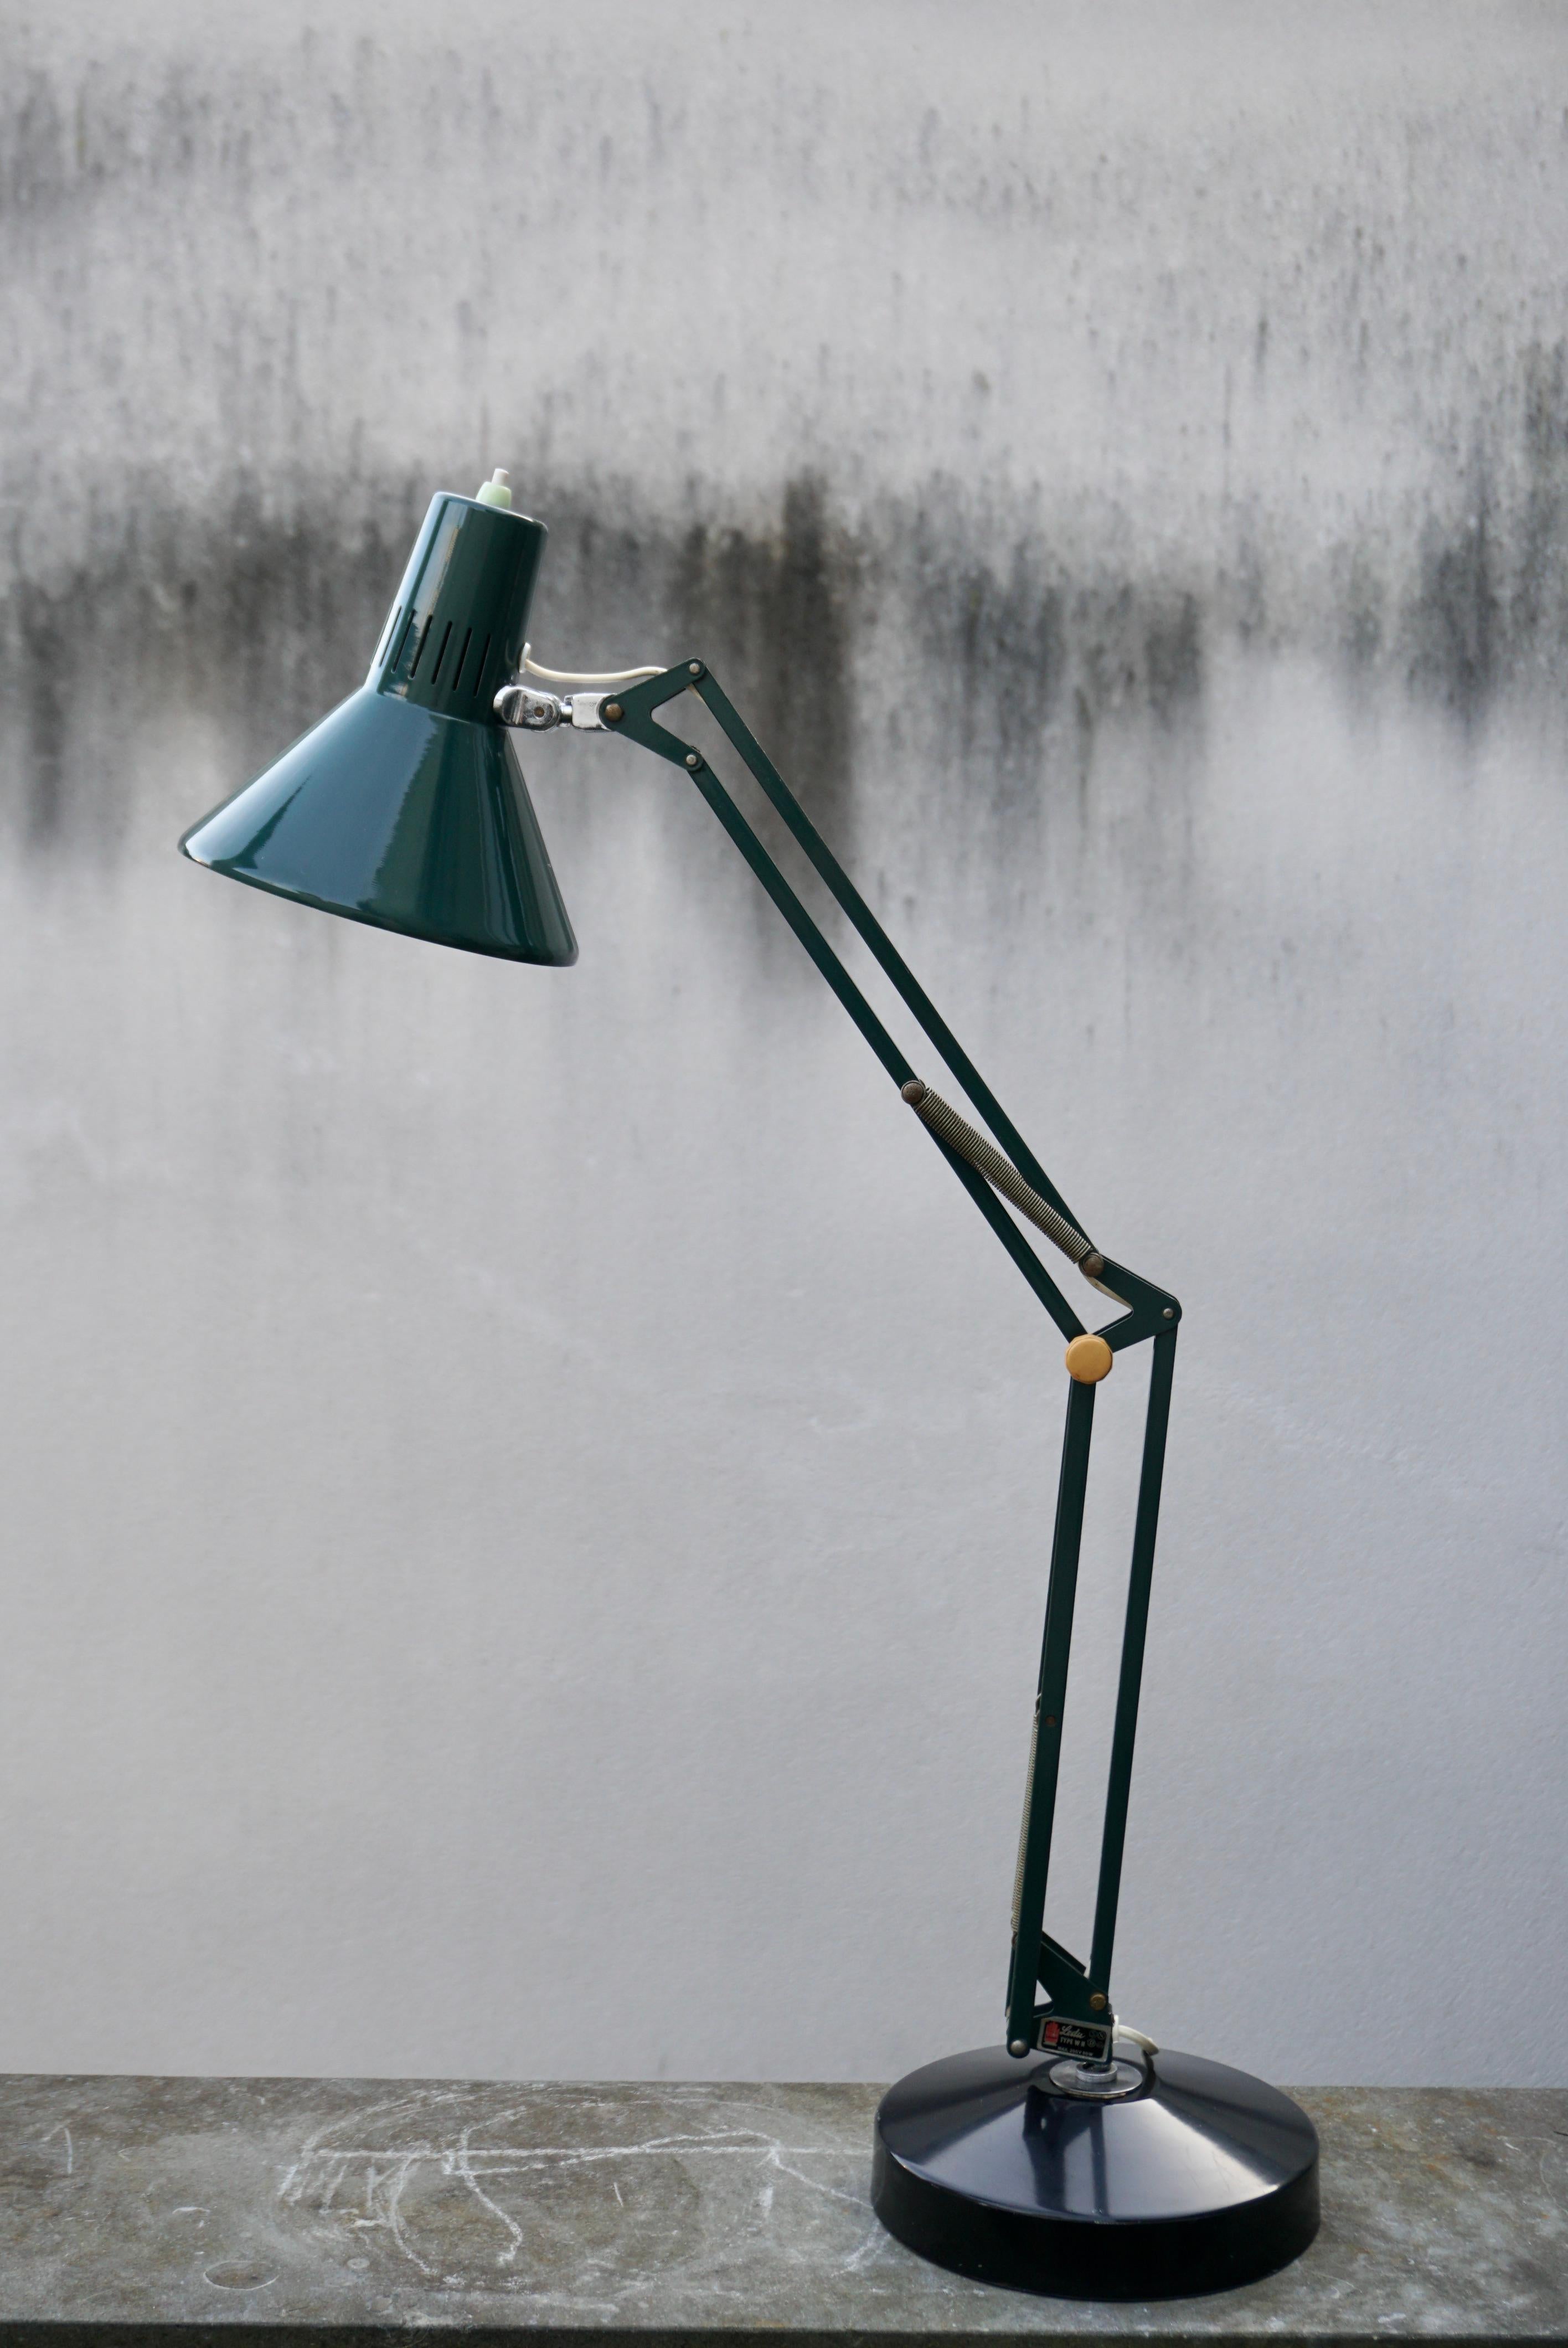 European Industrial Office Architect Desk Lamp by Ledu, 1970s, Made in Sweden For Sale